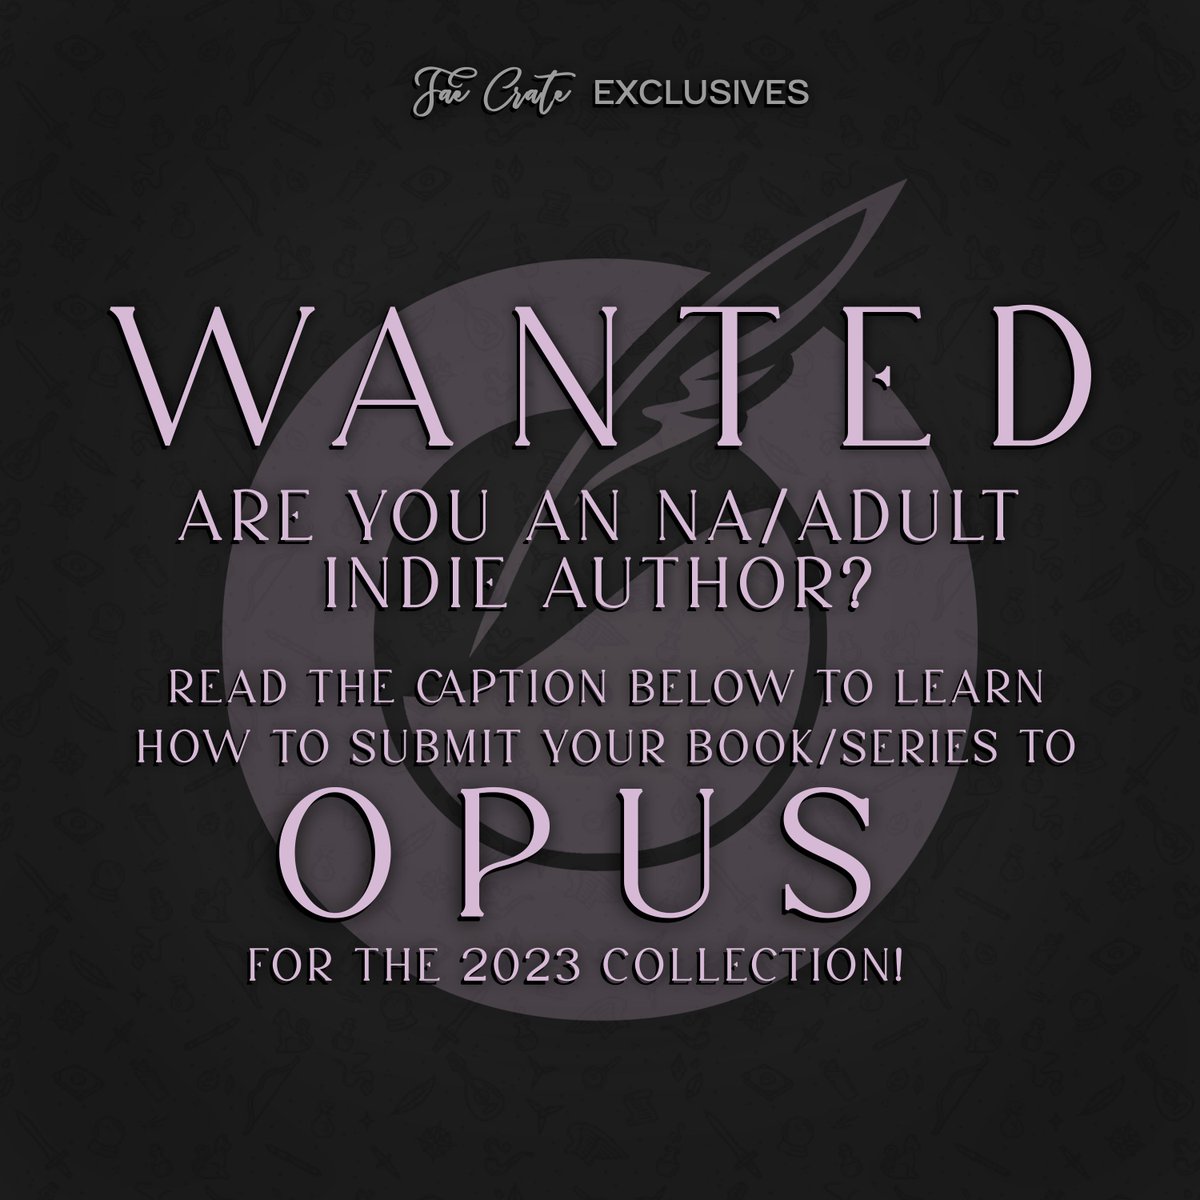 📣 CALLING ALL AUTHORS! We are searching for potential authors and Adult/NA series to be included in our 2023 OPUS COLLECTIONS! ✨ 🔗 Check the link in our bio for the submission form along with all the information you need!